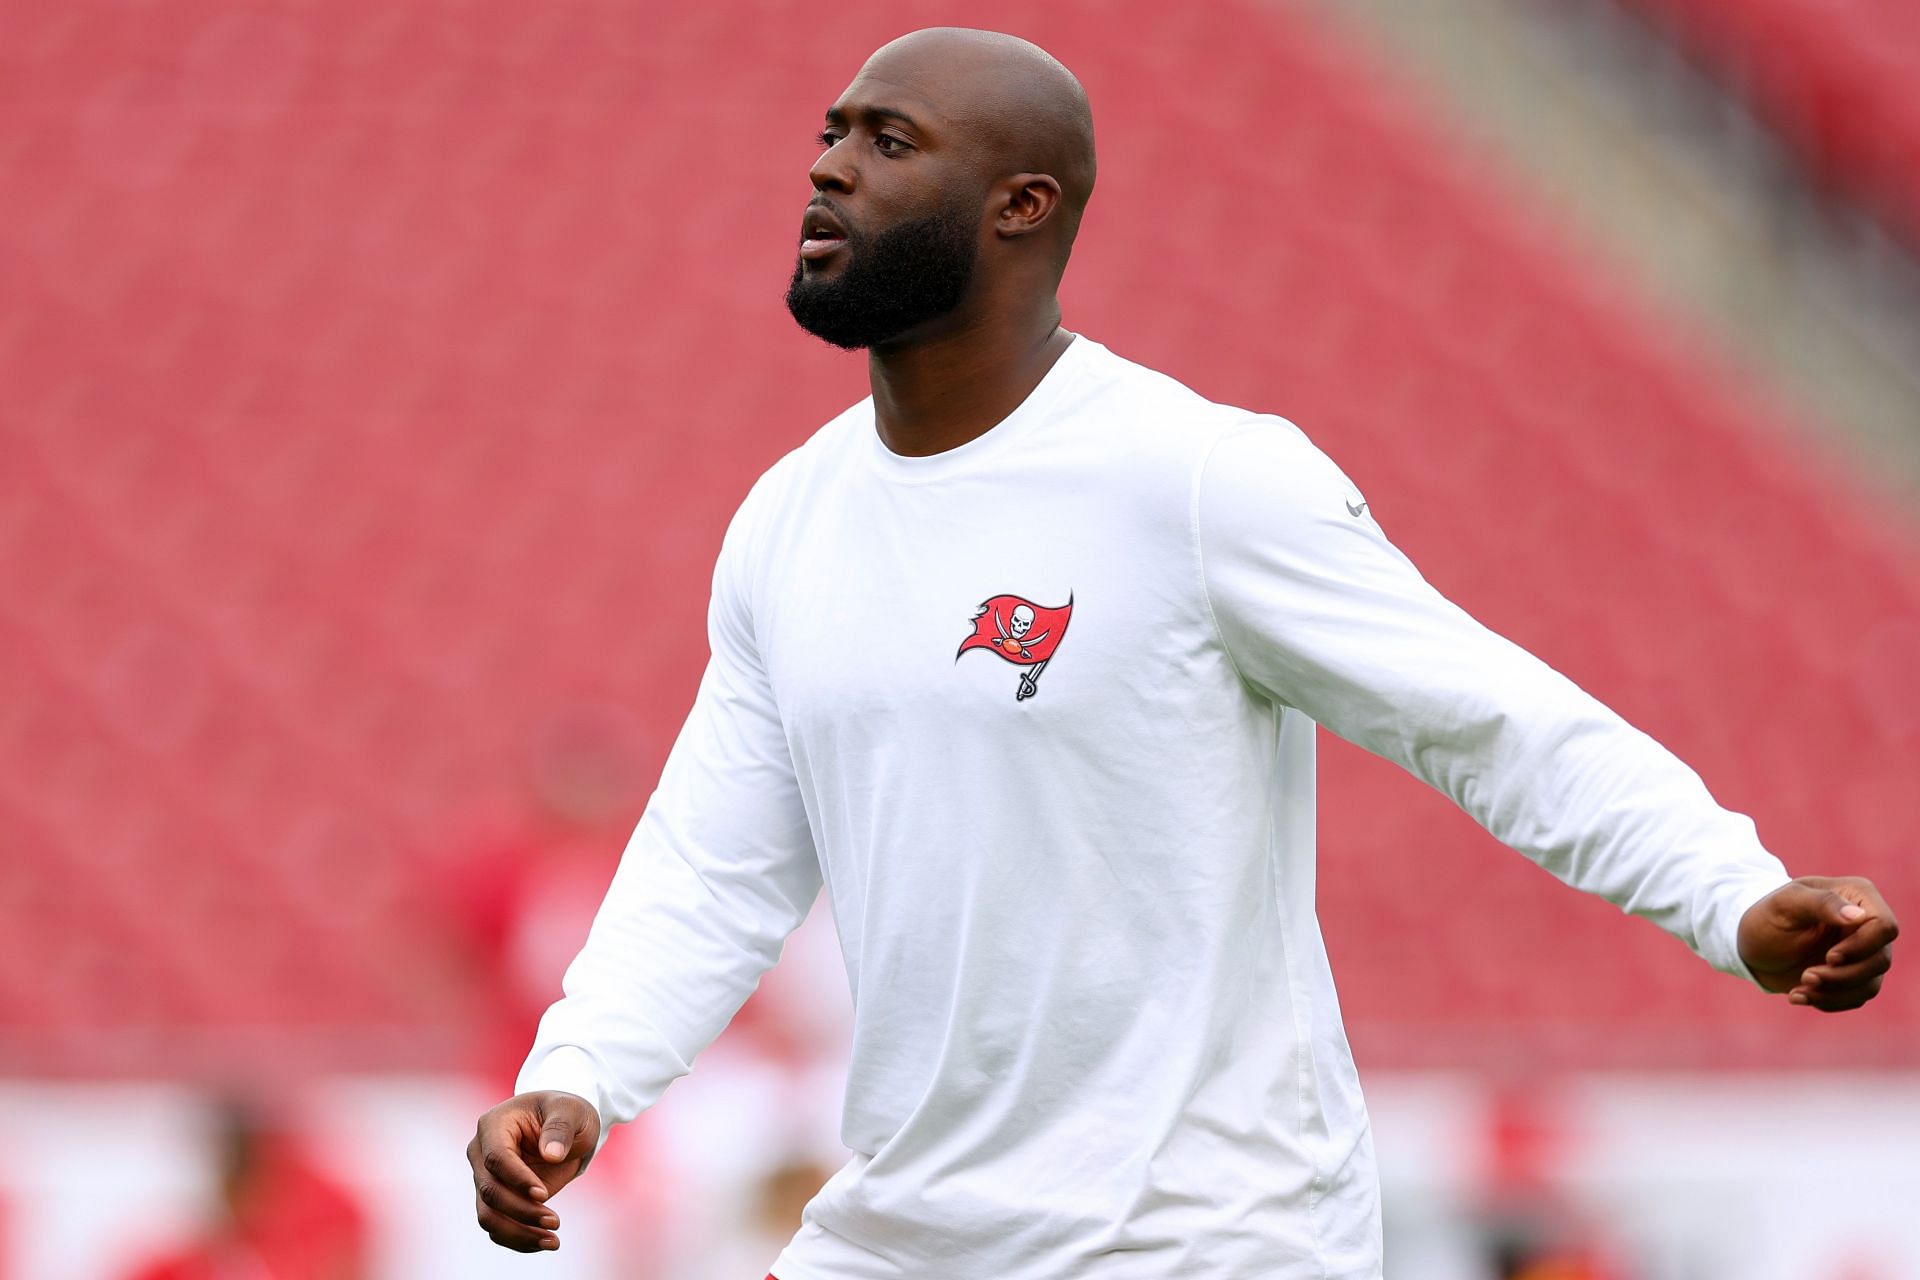 Bucs make the signing of Leonard Fournette official - Bucs Nation